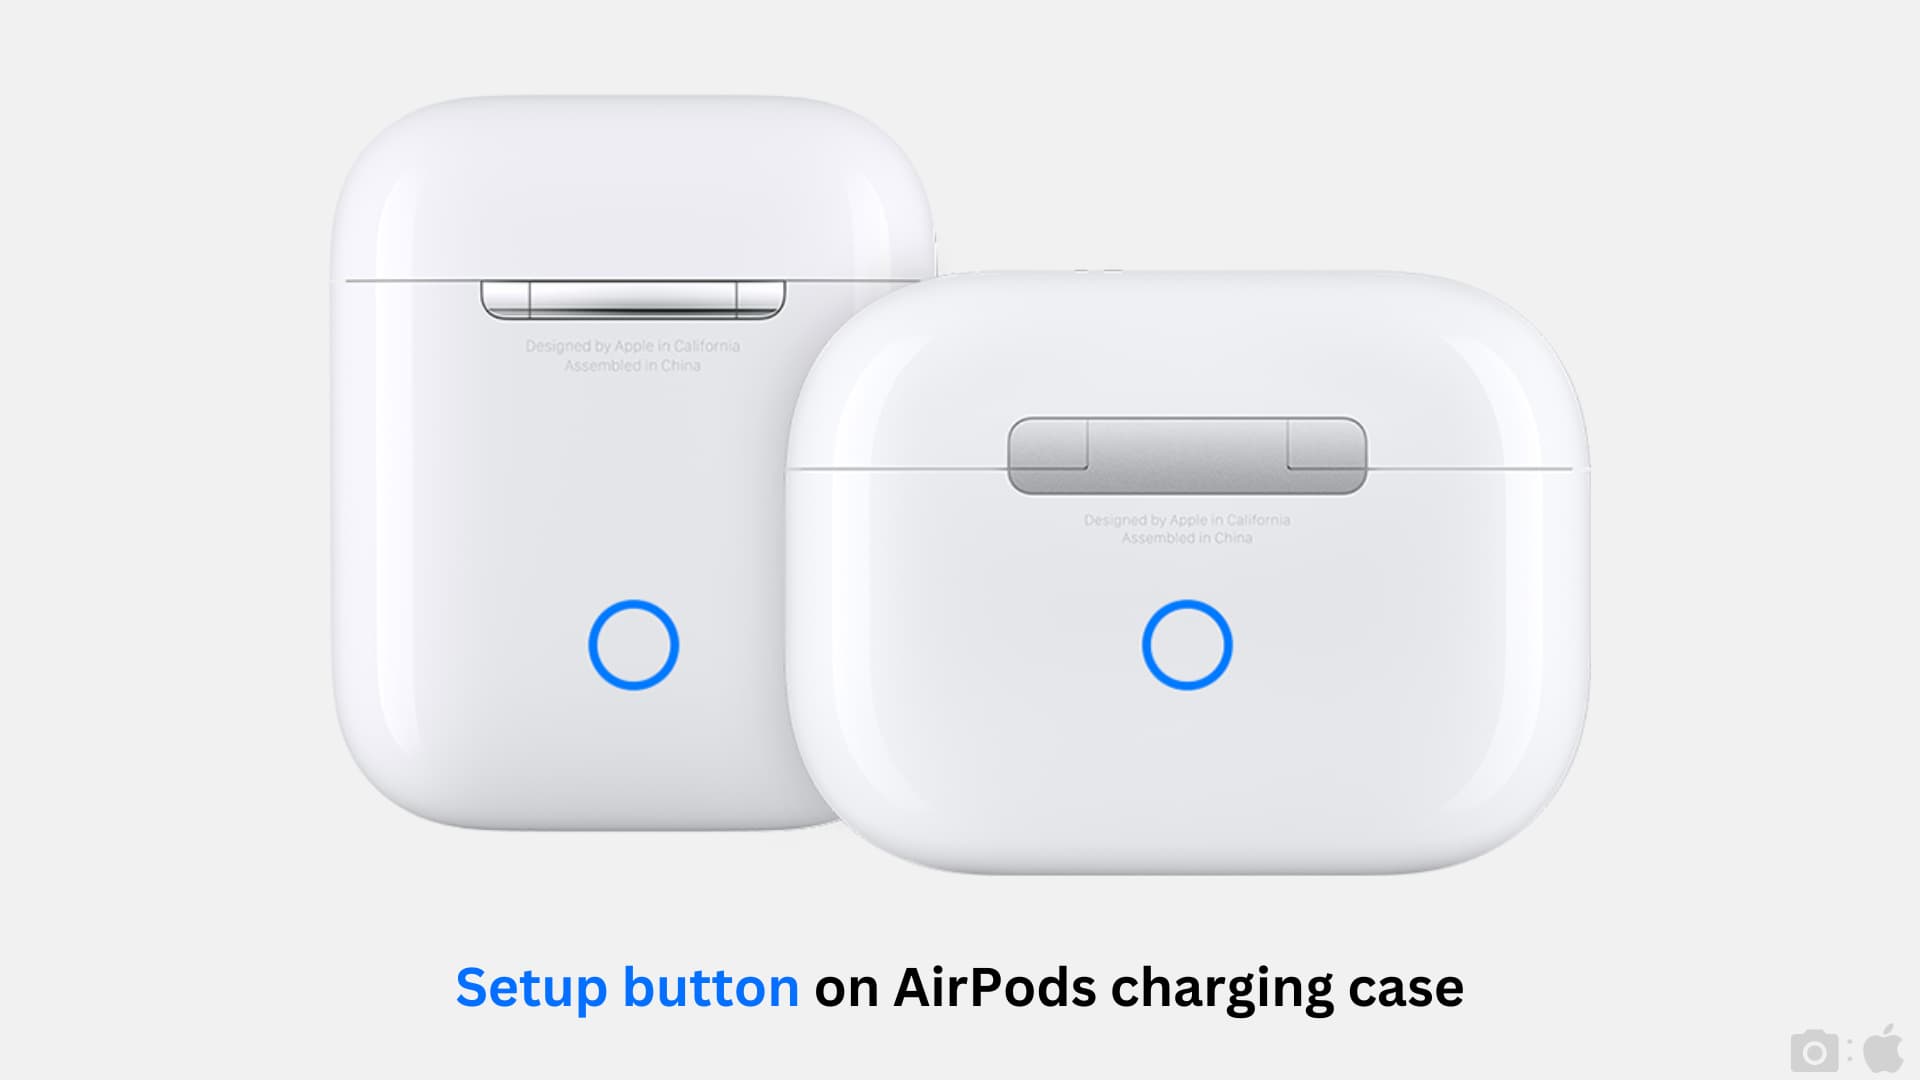 Setup button on AirPods charging case